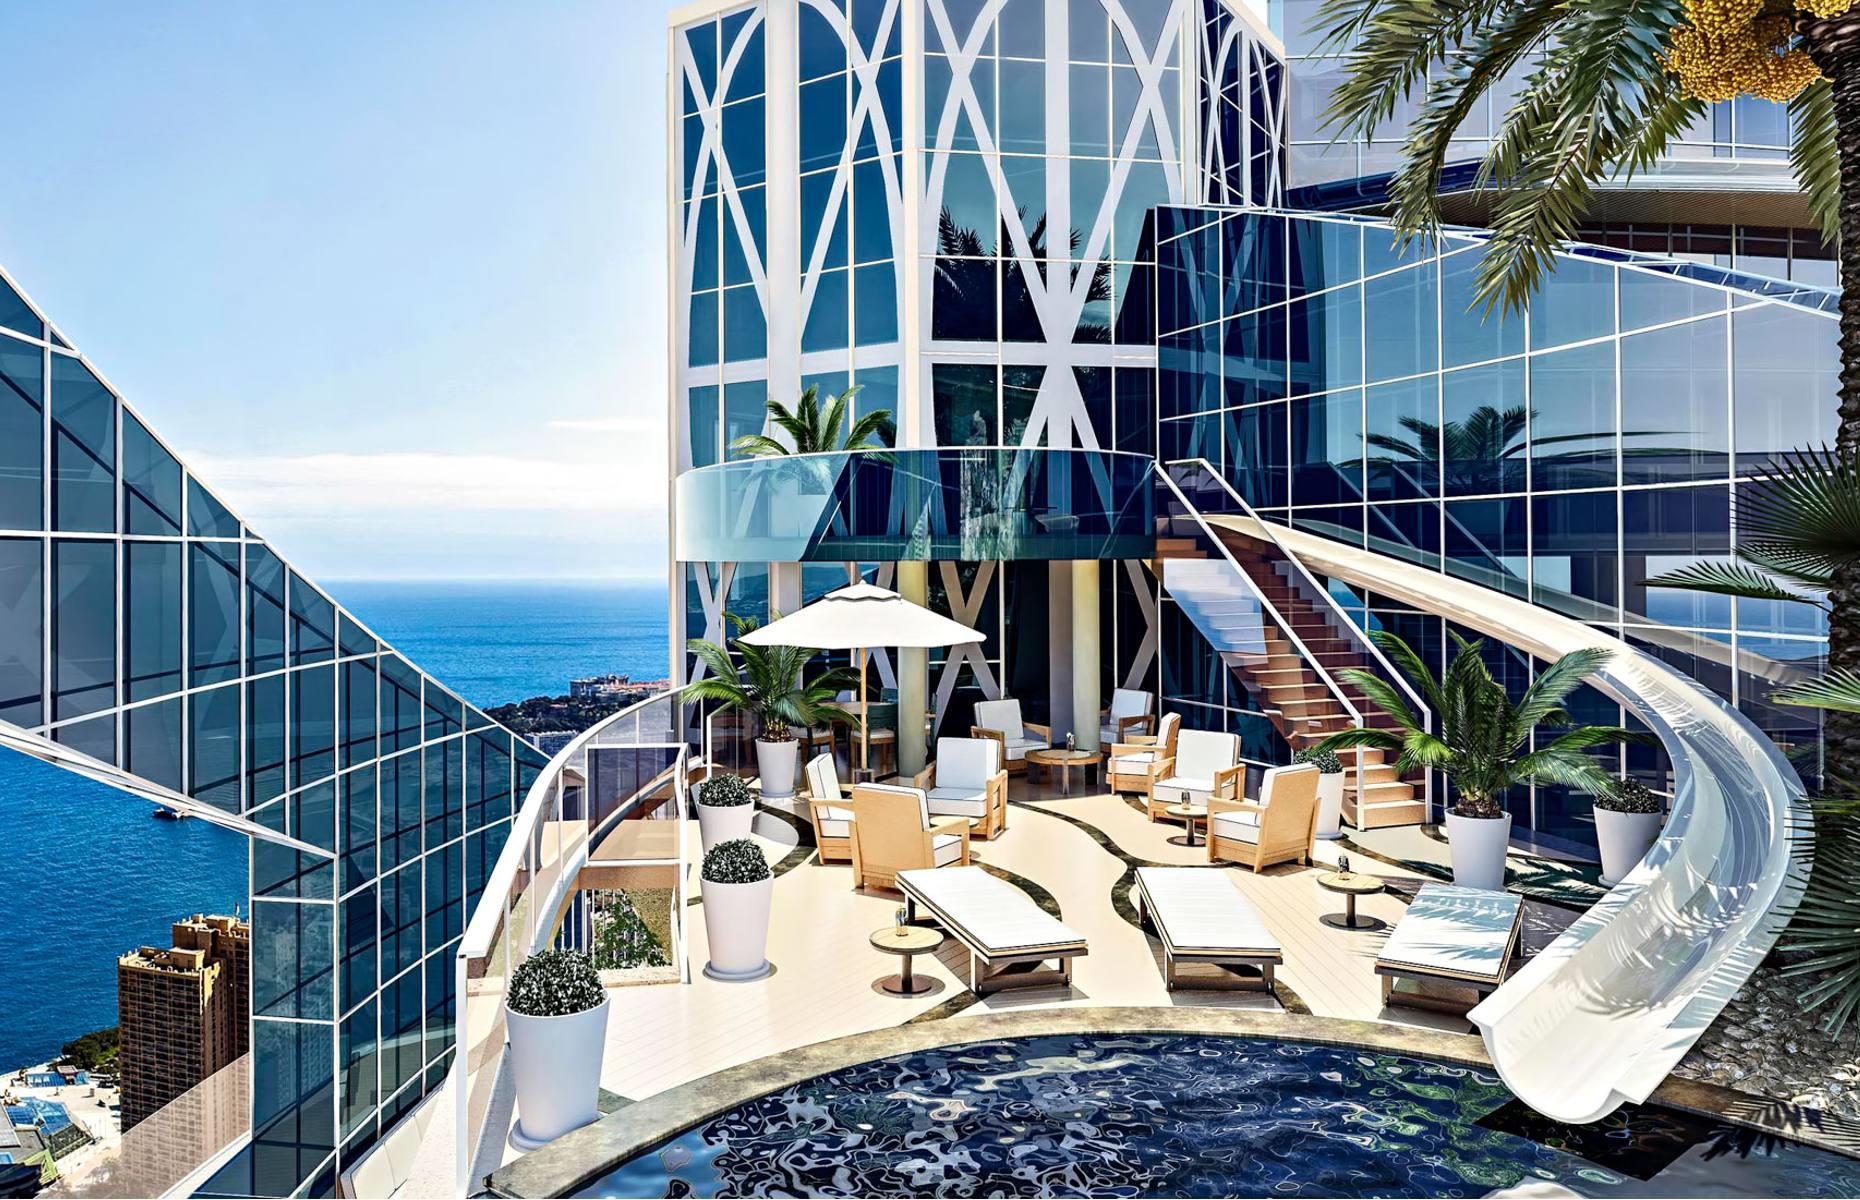 <p>A real billionaire’s playground, the penthouse not only has 360-degree views out across the Mediterranean but features a waterslide that descends from a dance floor directly into a mind-blowing rooftop infinity pool. How’s that for the perfect party pad? The property is also close to Monte Carlo’s fabled casino and Royal Palace, once inhabited by America’s princess Grace Kelly, who was married to the principality's monarch, Prince Rainier. </p>